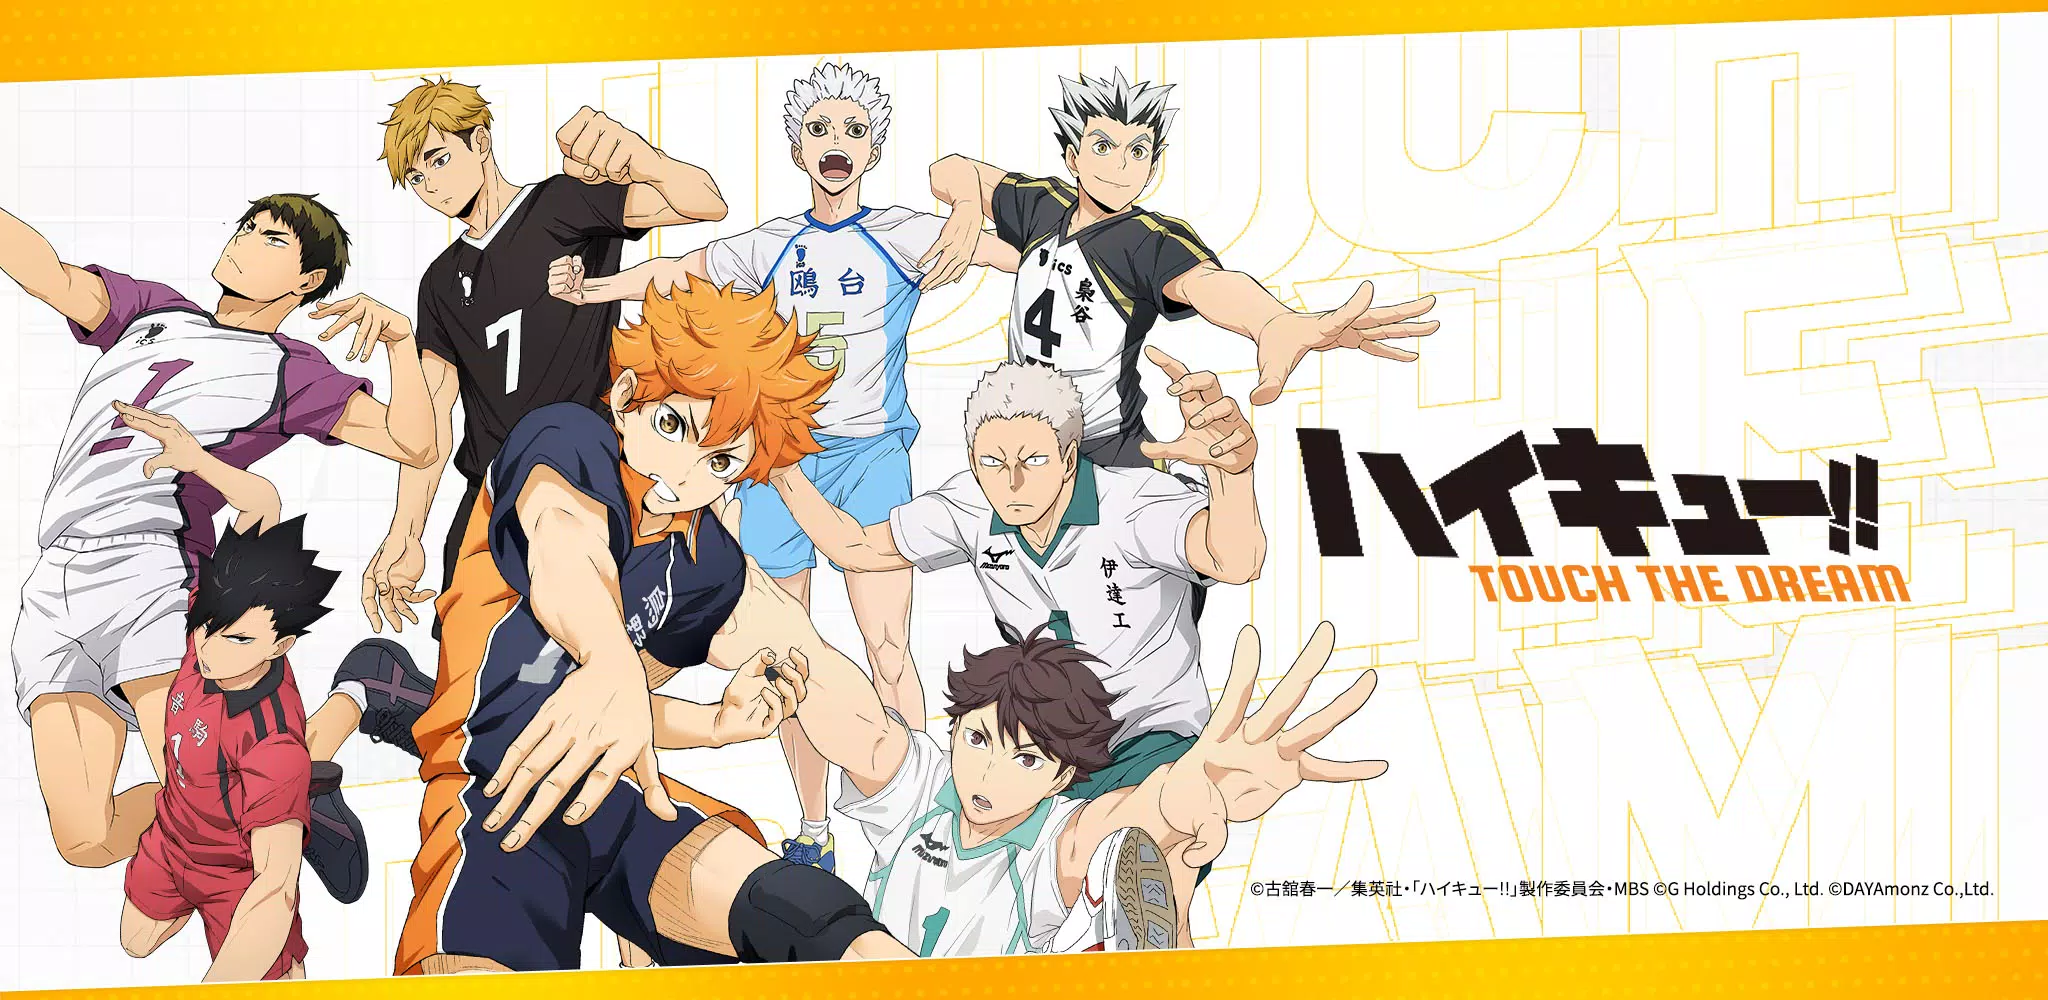 Catch the Dream with a Touch: Haikyuu!! Mobile Game Set to Launch